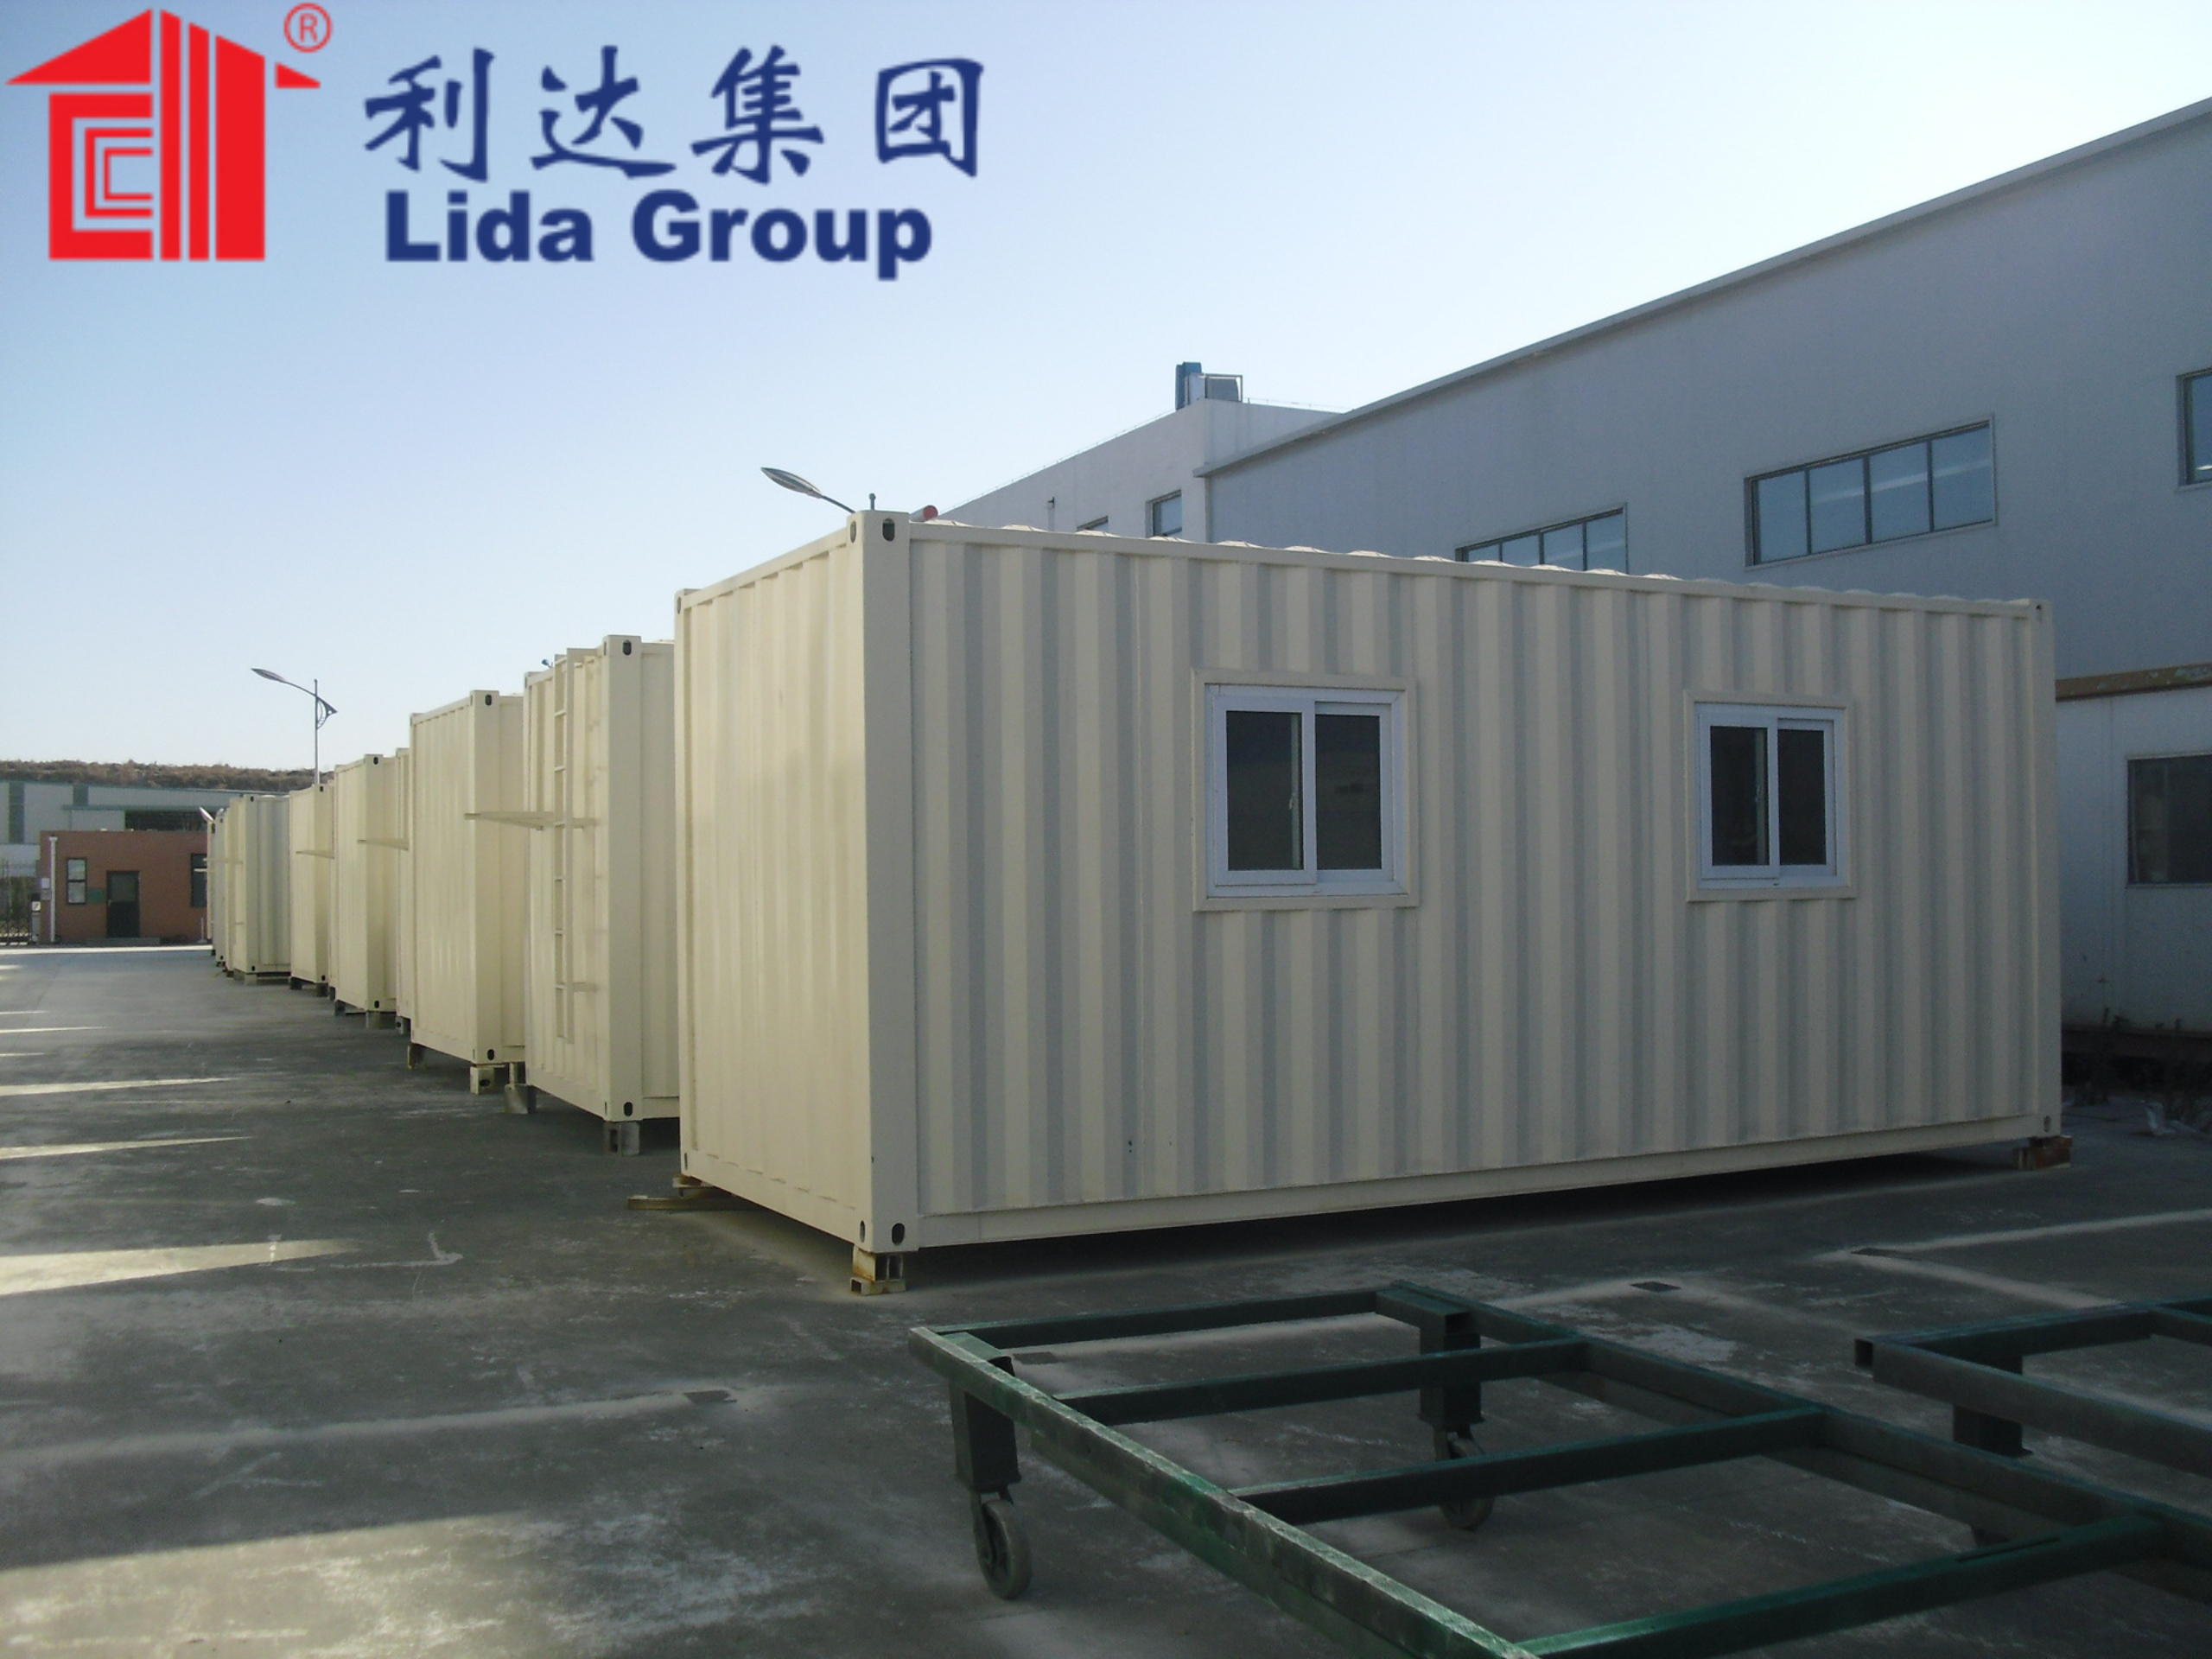 Expanding portfolio of temporary construction projects employ Lida Group's reusable, relocatable container homes and commercial workshops to support rural healthcare clinics, disaster recovery outreach and remote work camp needs.